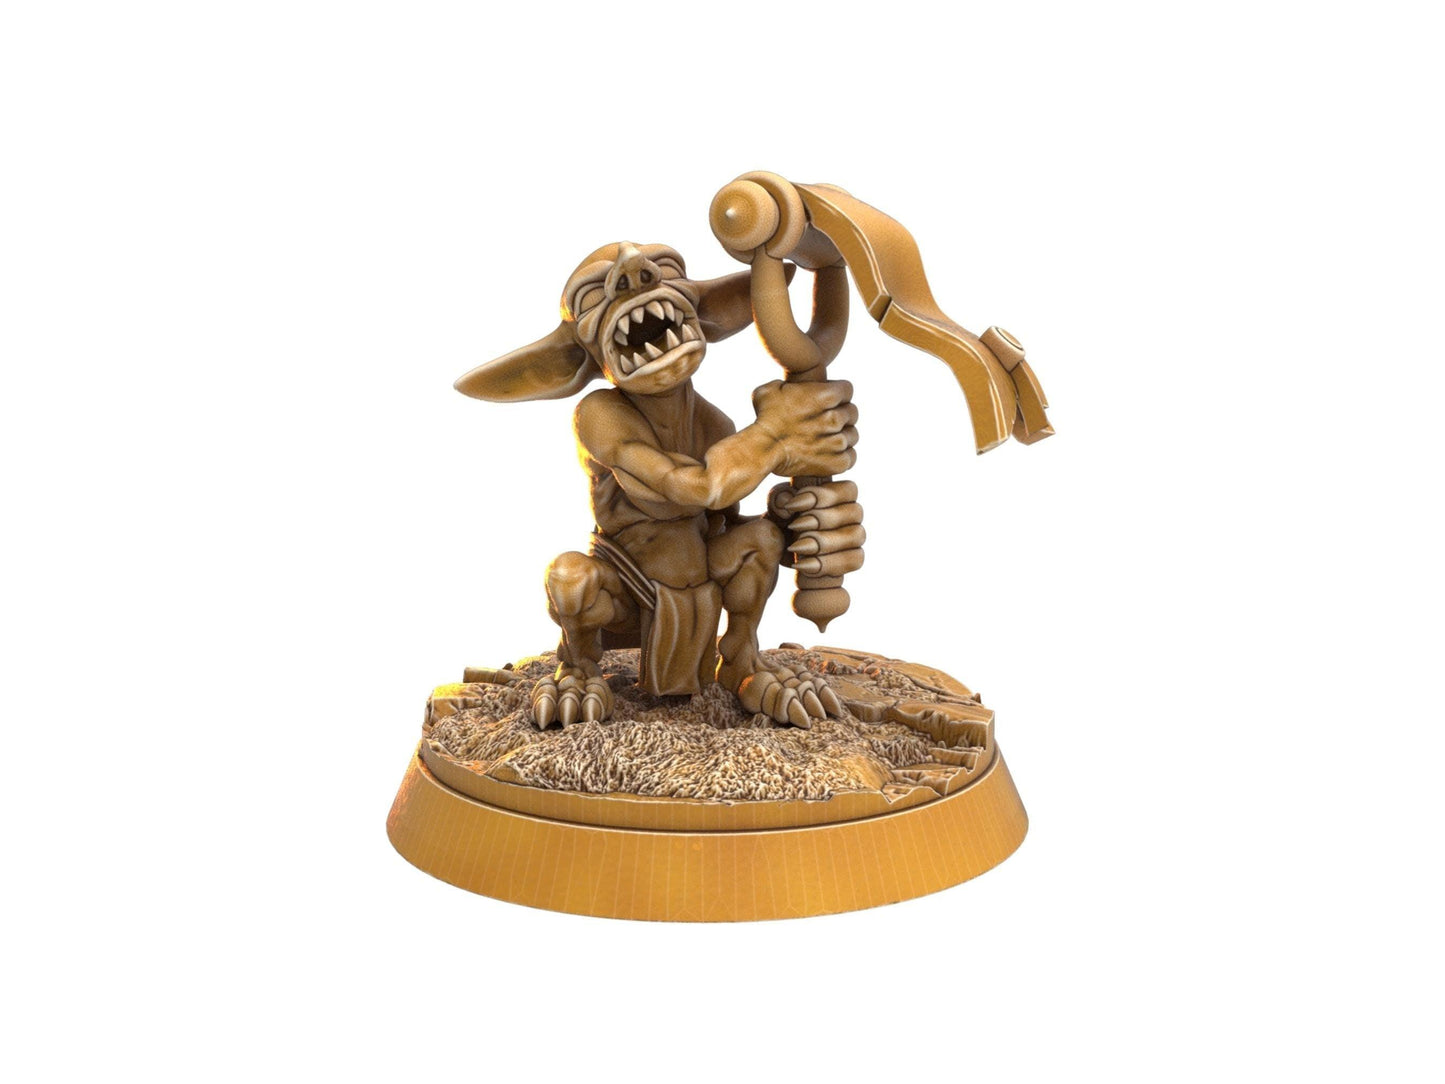 DnD Goblin Miniature Small Monster MIniature - 6 Poses - 32mm scale Tabletop gaming DnD Miniature Dungeons and Dragons dnd 5e book miniature small miniature - Plague Miniatures shop for DnD Miniatures